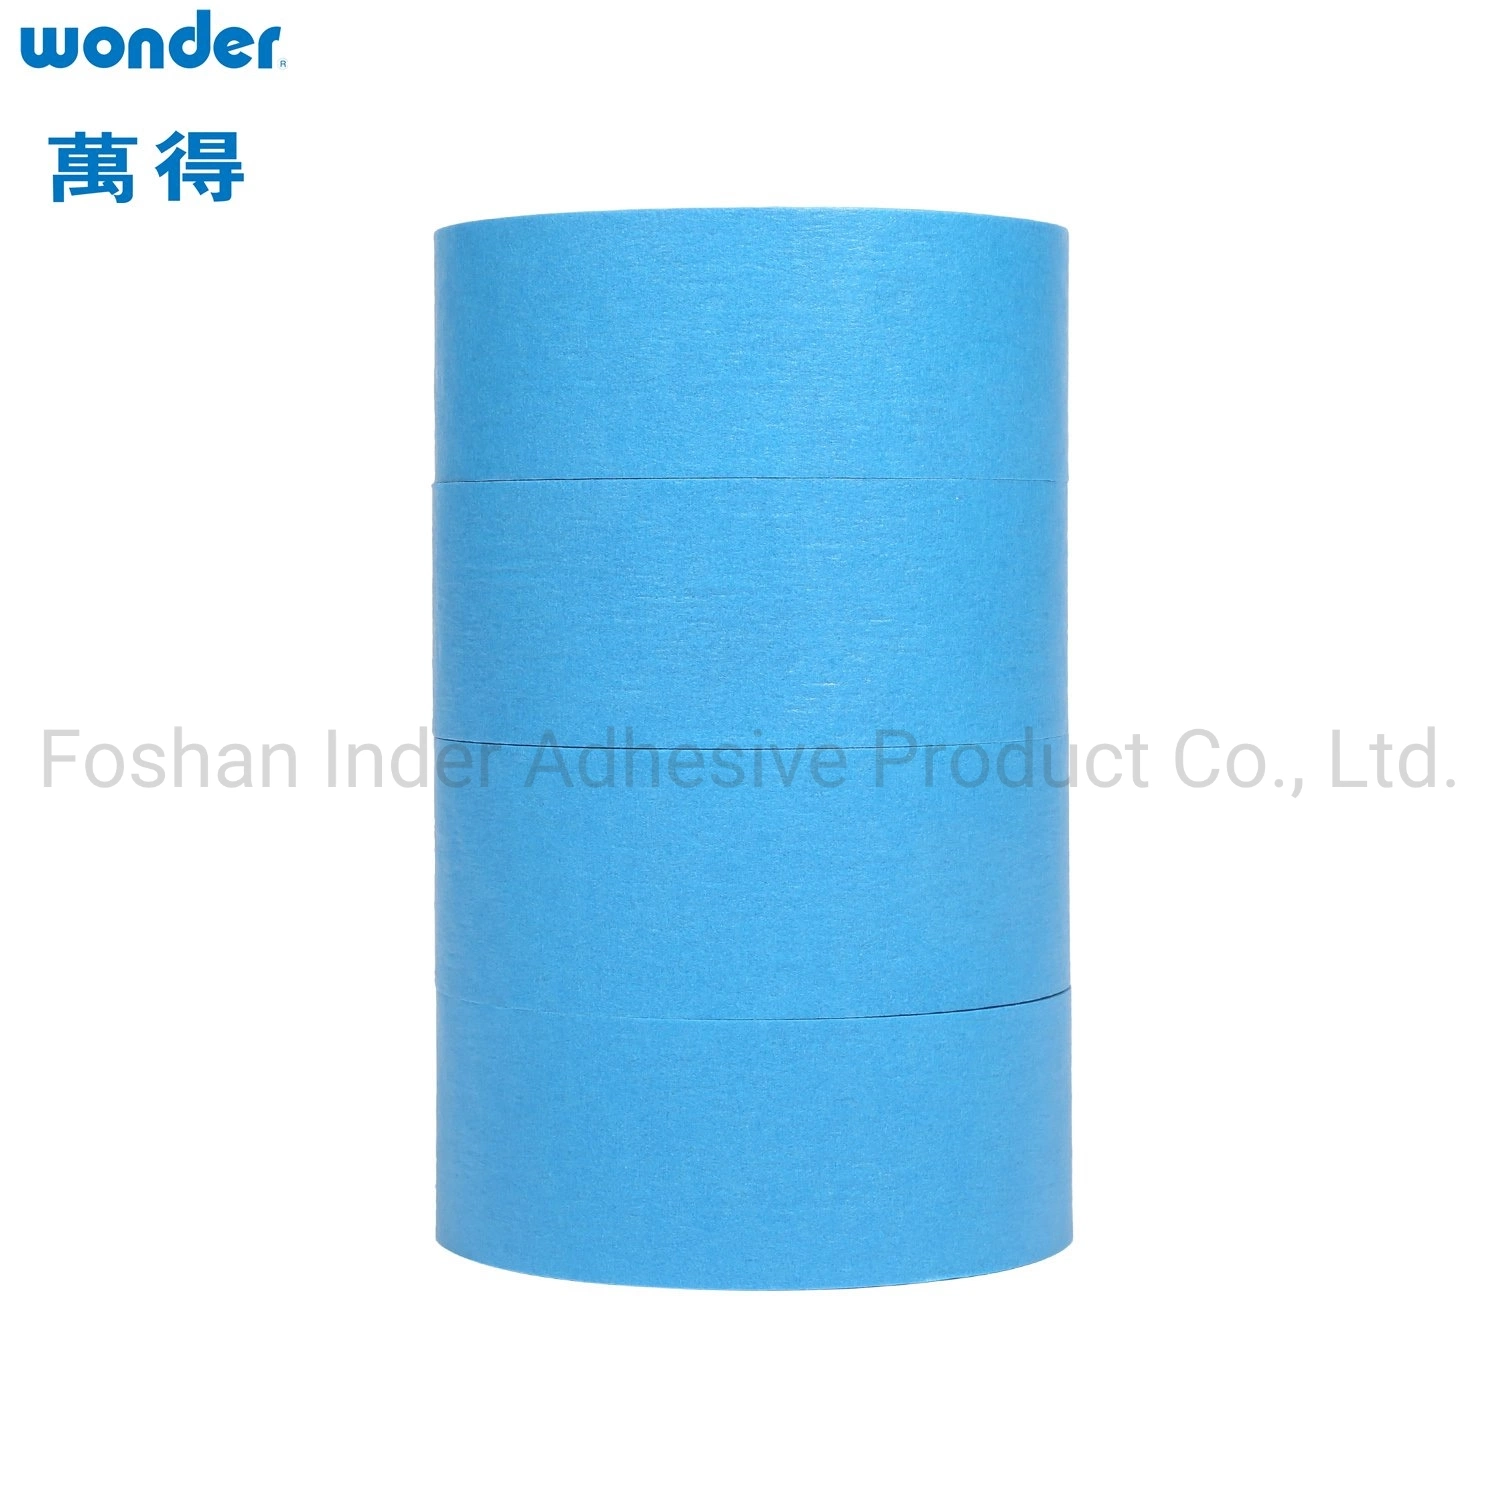 Wonder Brand Reliable Quality Normal Temperature Rubber Glue Masking Crepe Paper Tape